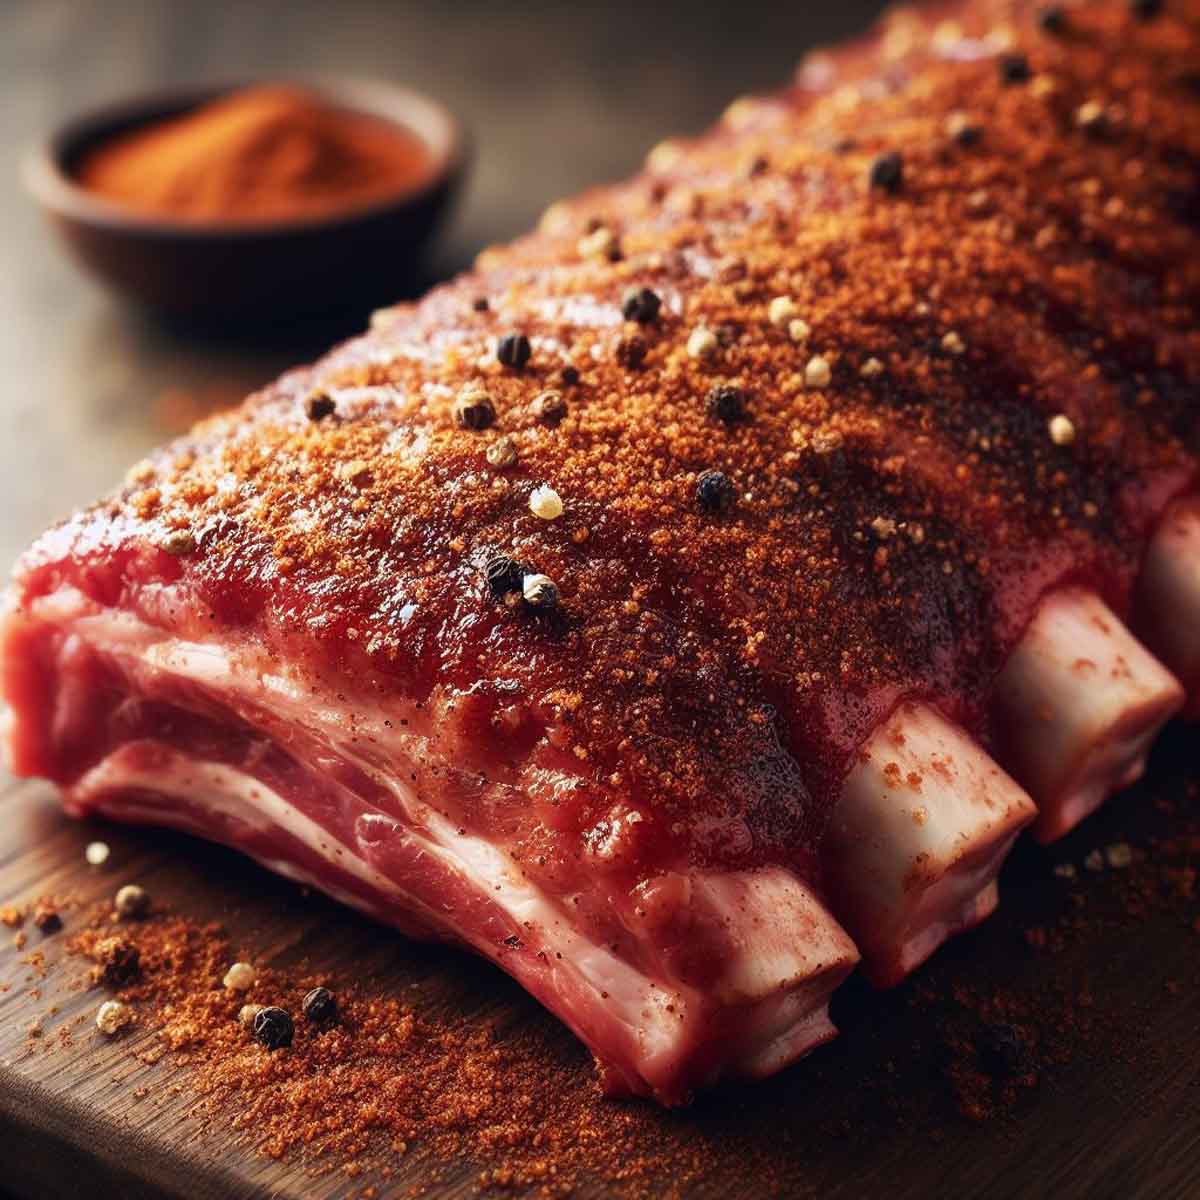 Raw pork baby back ribs evenly coated with a dark, spice-rich dry rub on a wooden surface.